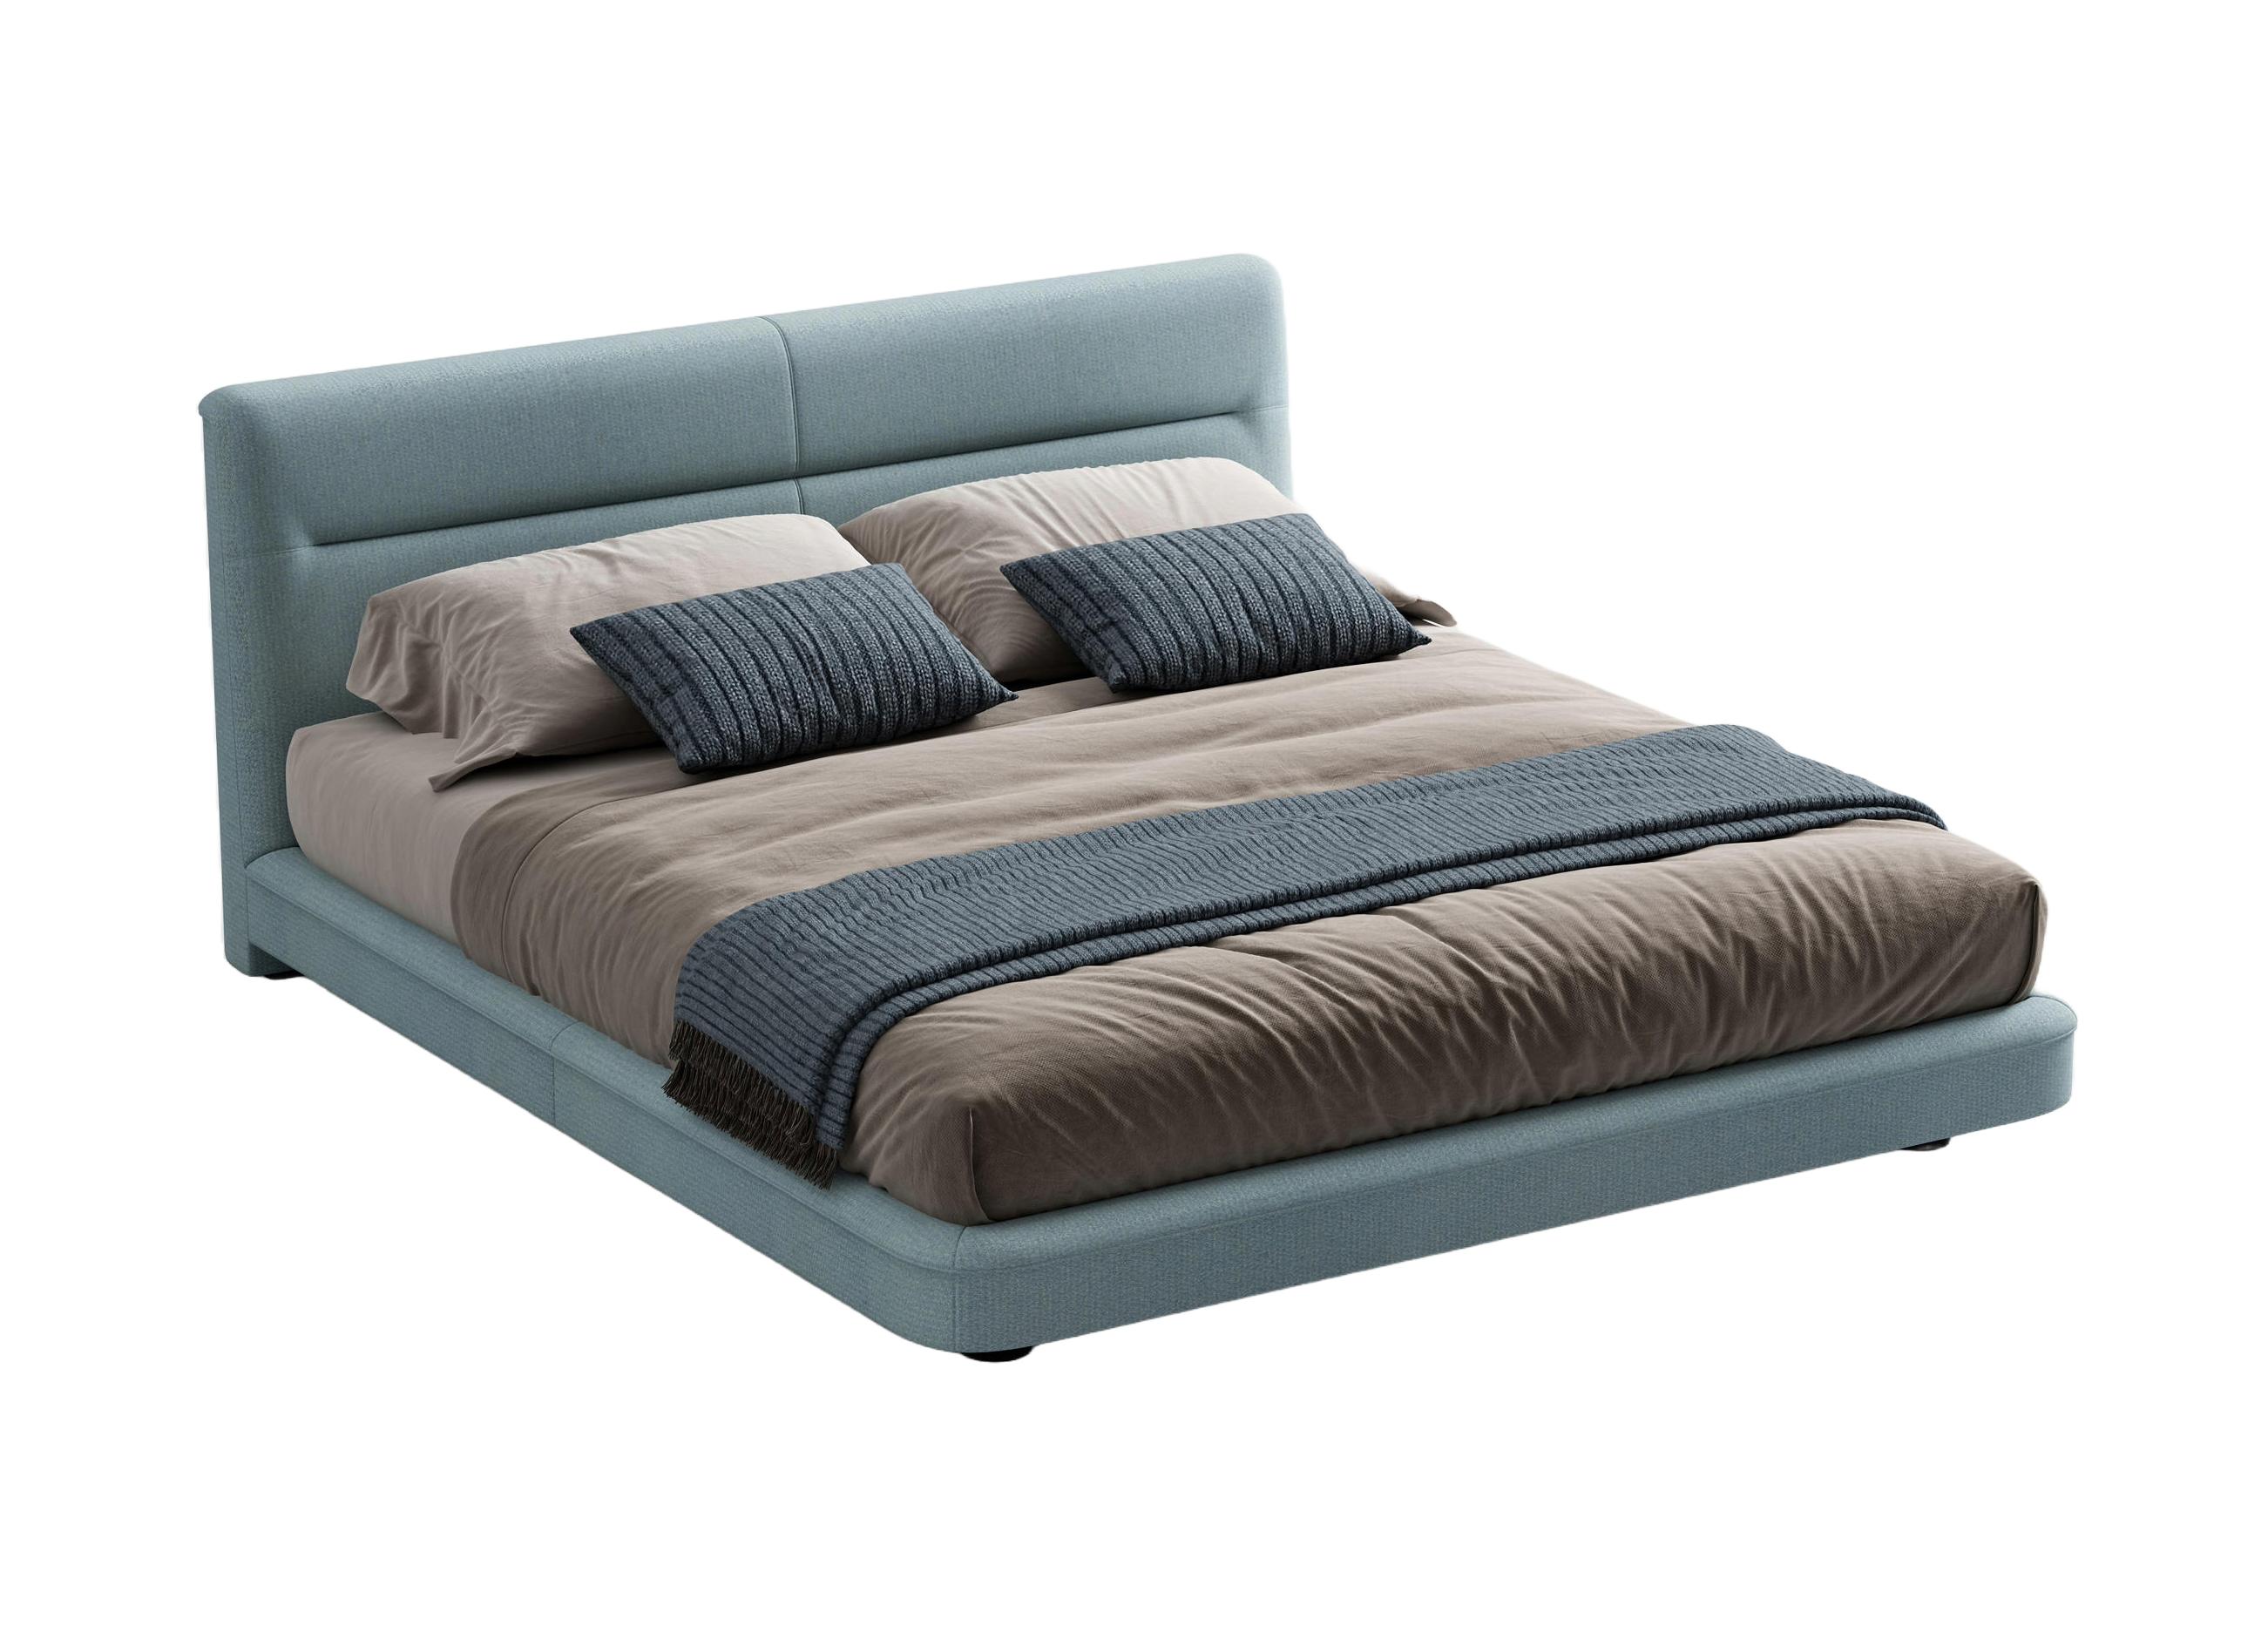 Clermont Italian Bed